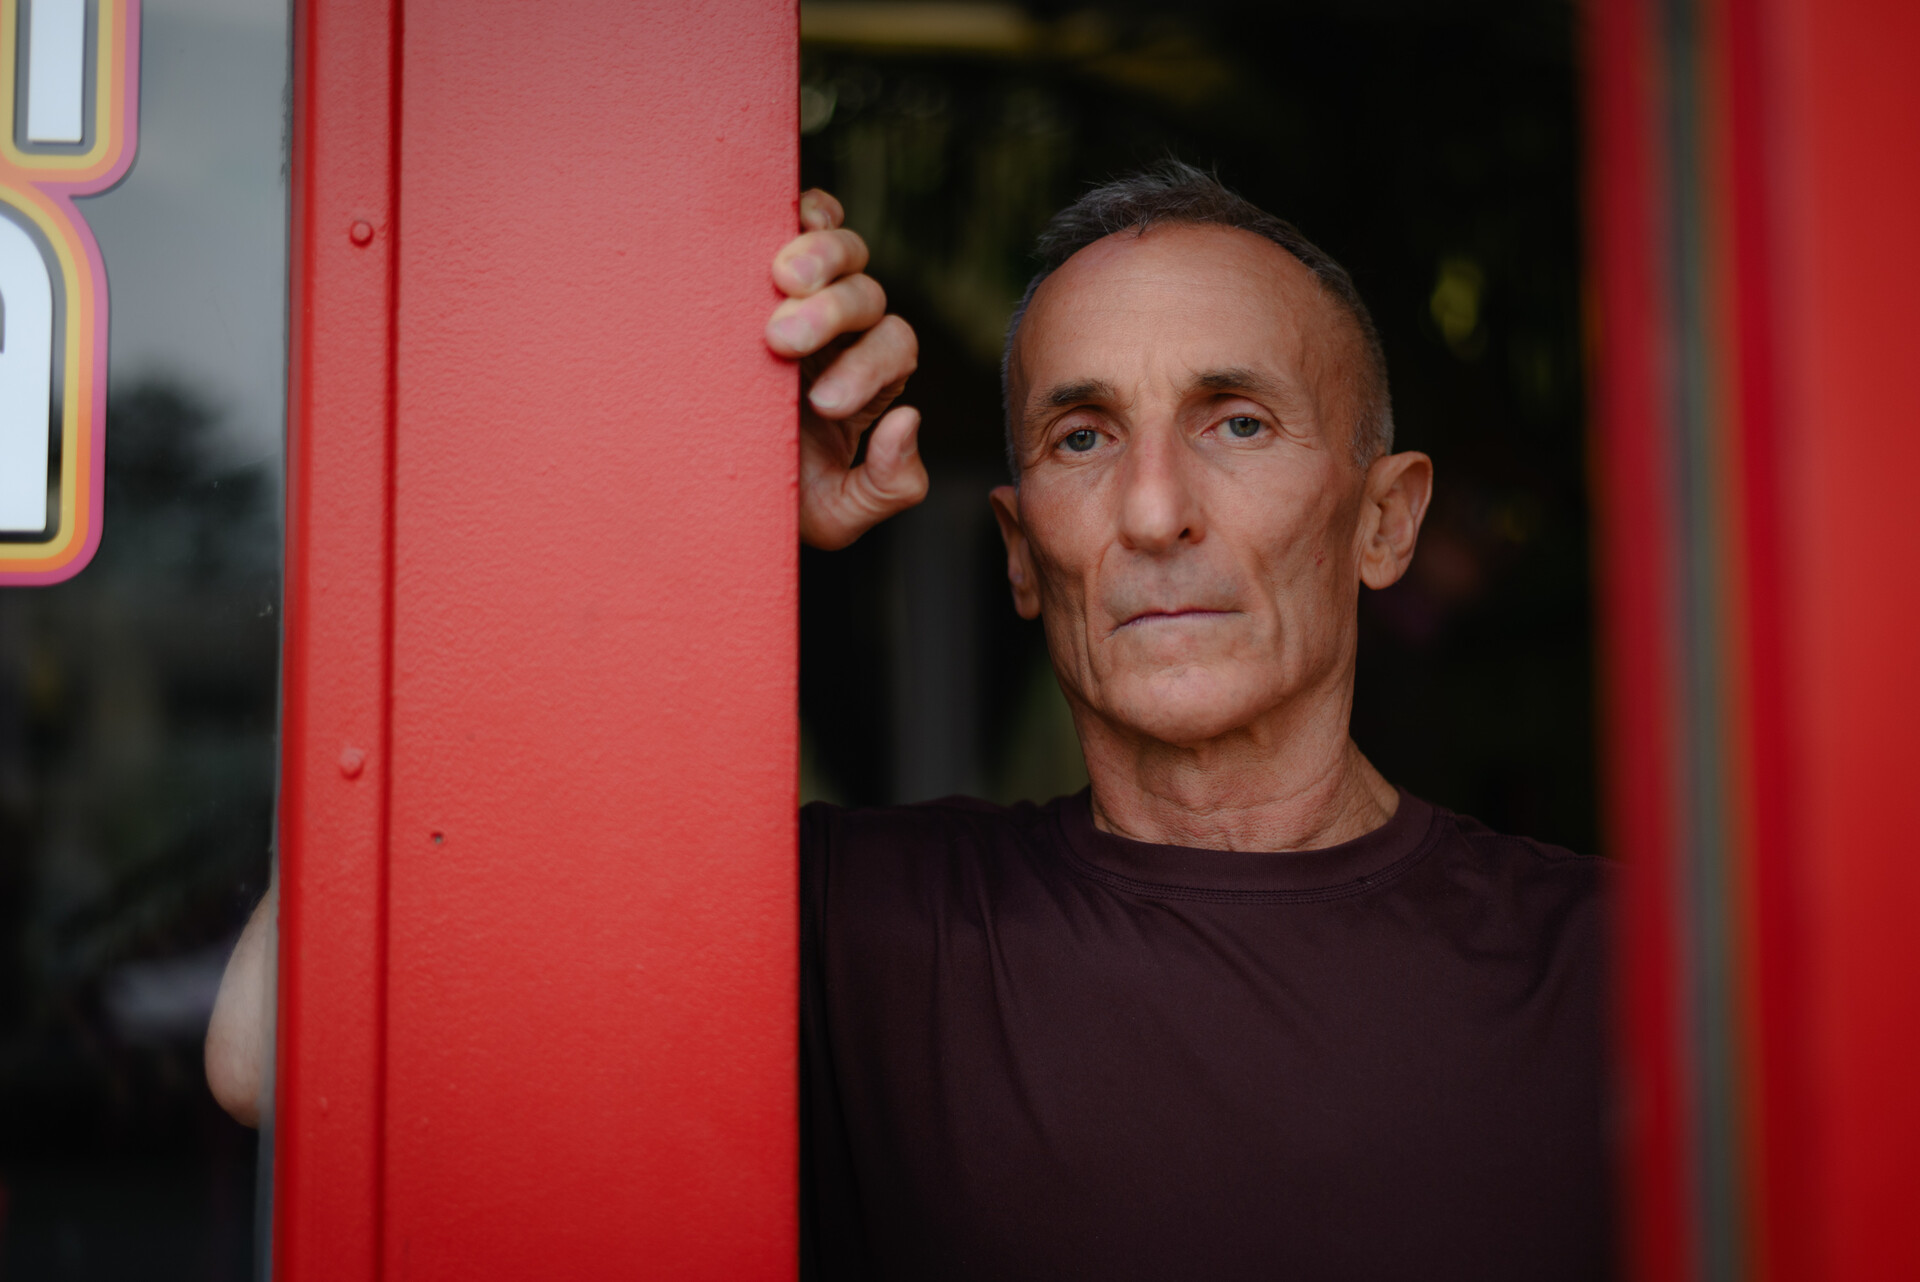 close-up portrait of a middle aged white man standing in a doorway, with one hand on the red-painted door frame